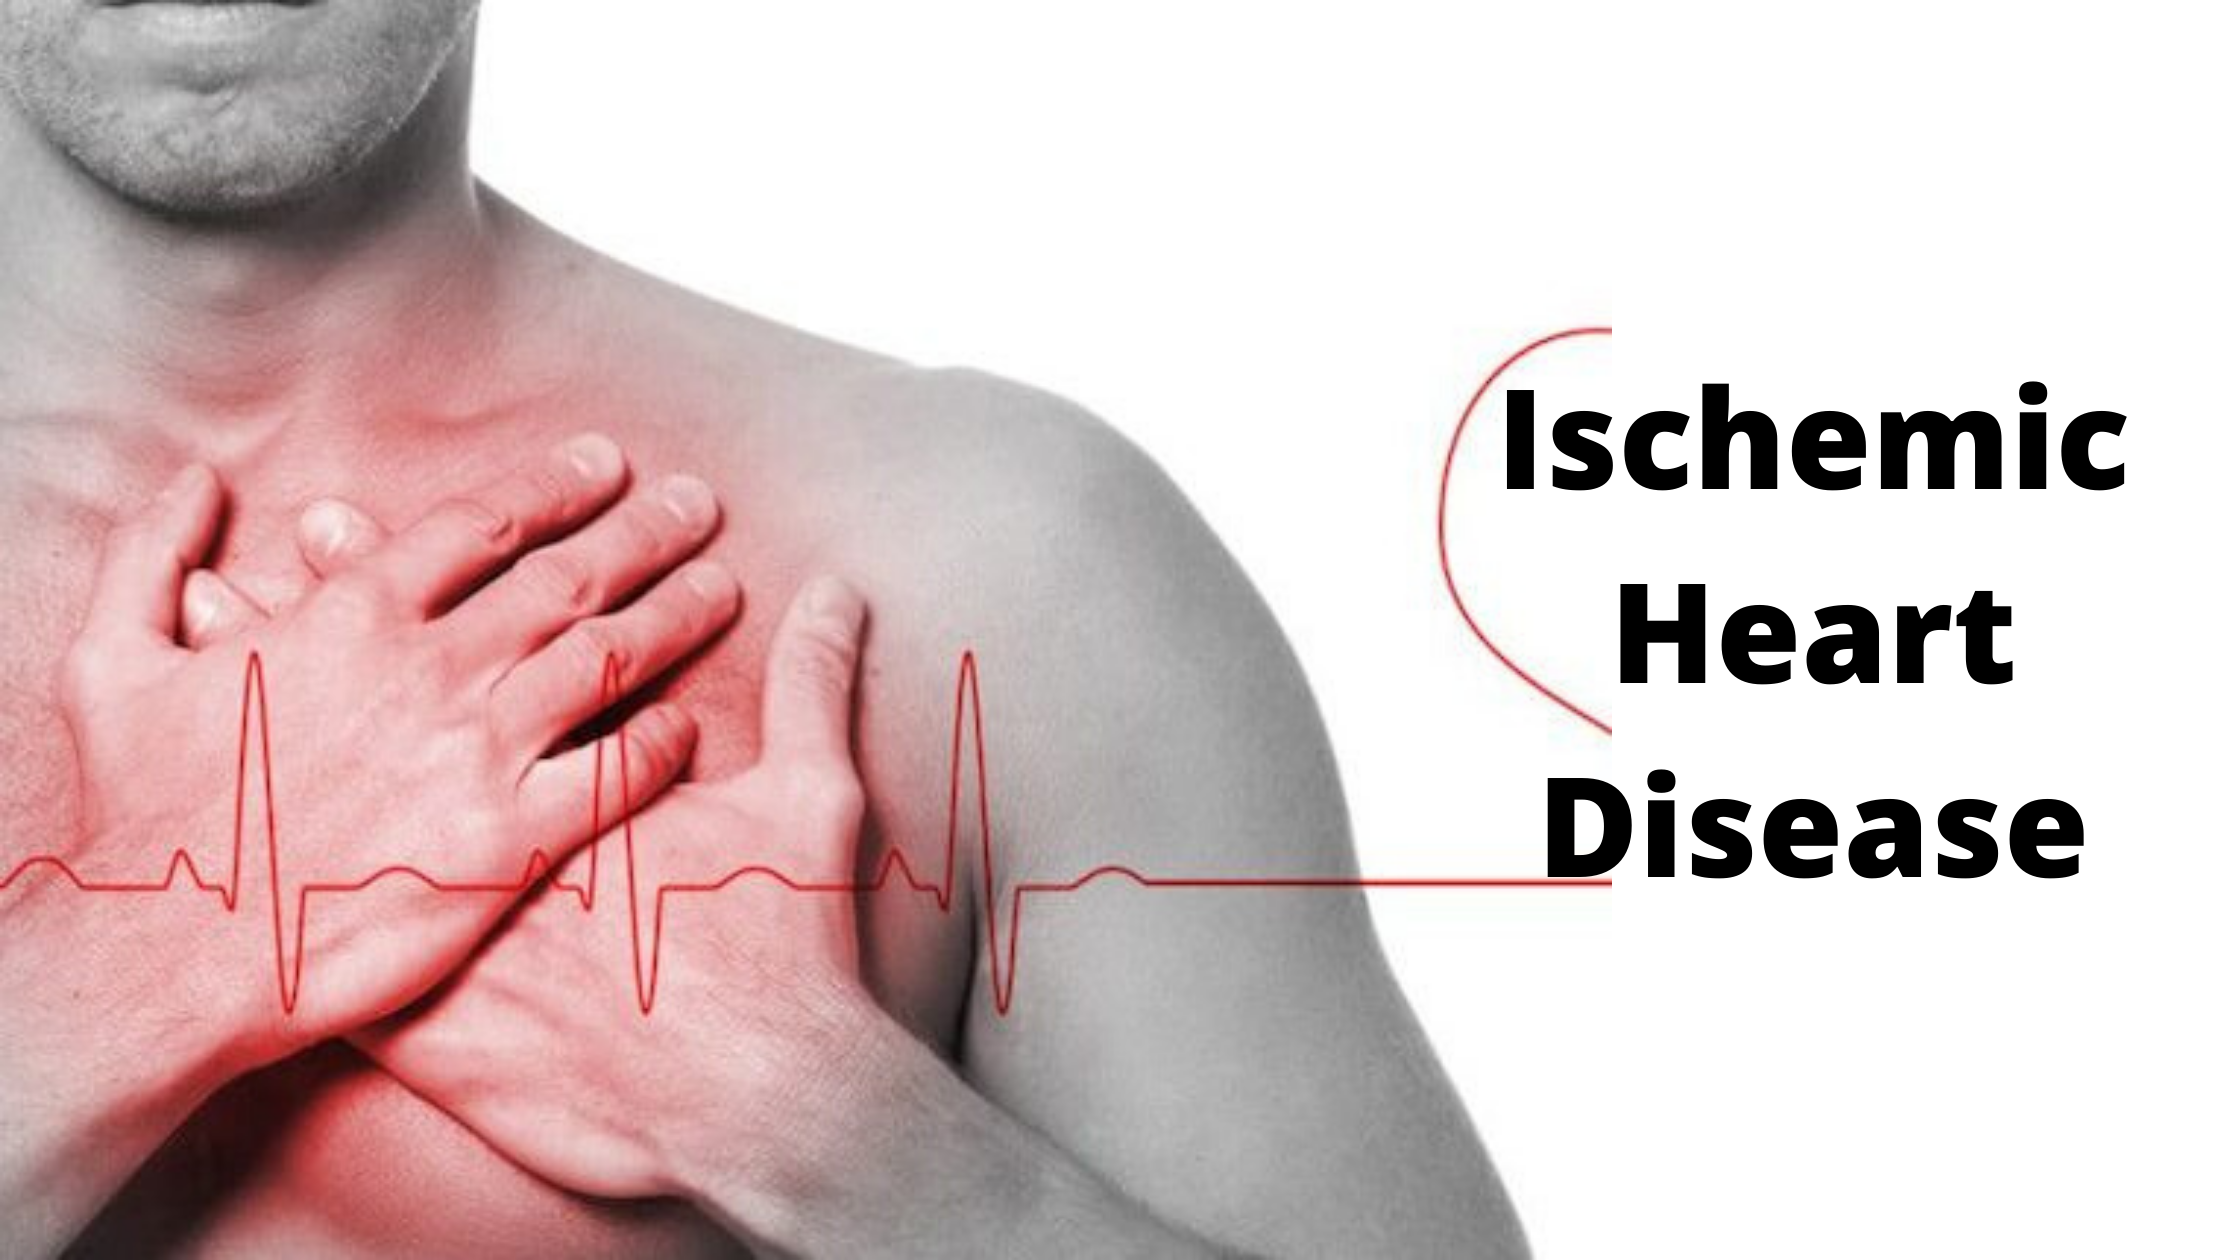 Ischemic Heart Disease (IHD) - Causes, Symptoms, Treatment & Diagnosis